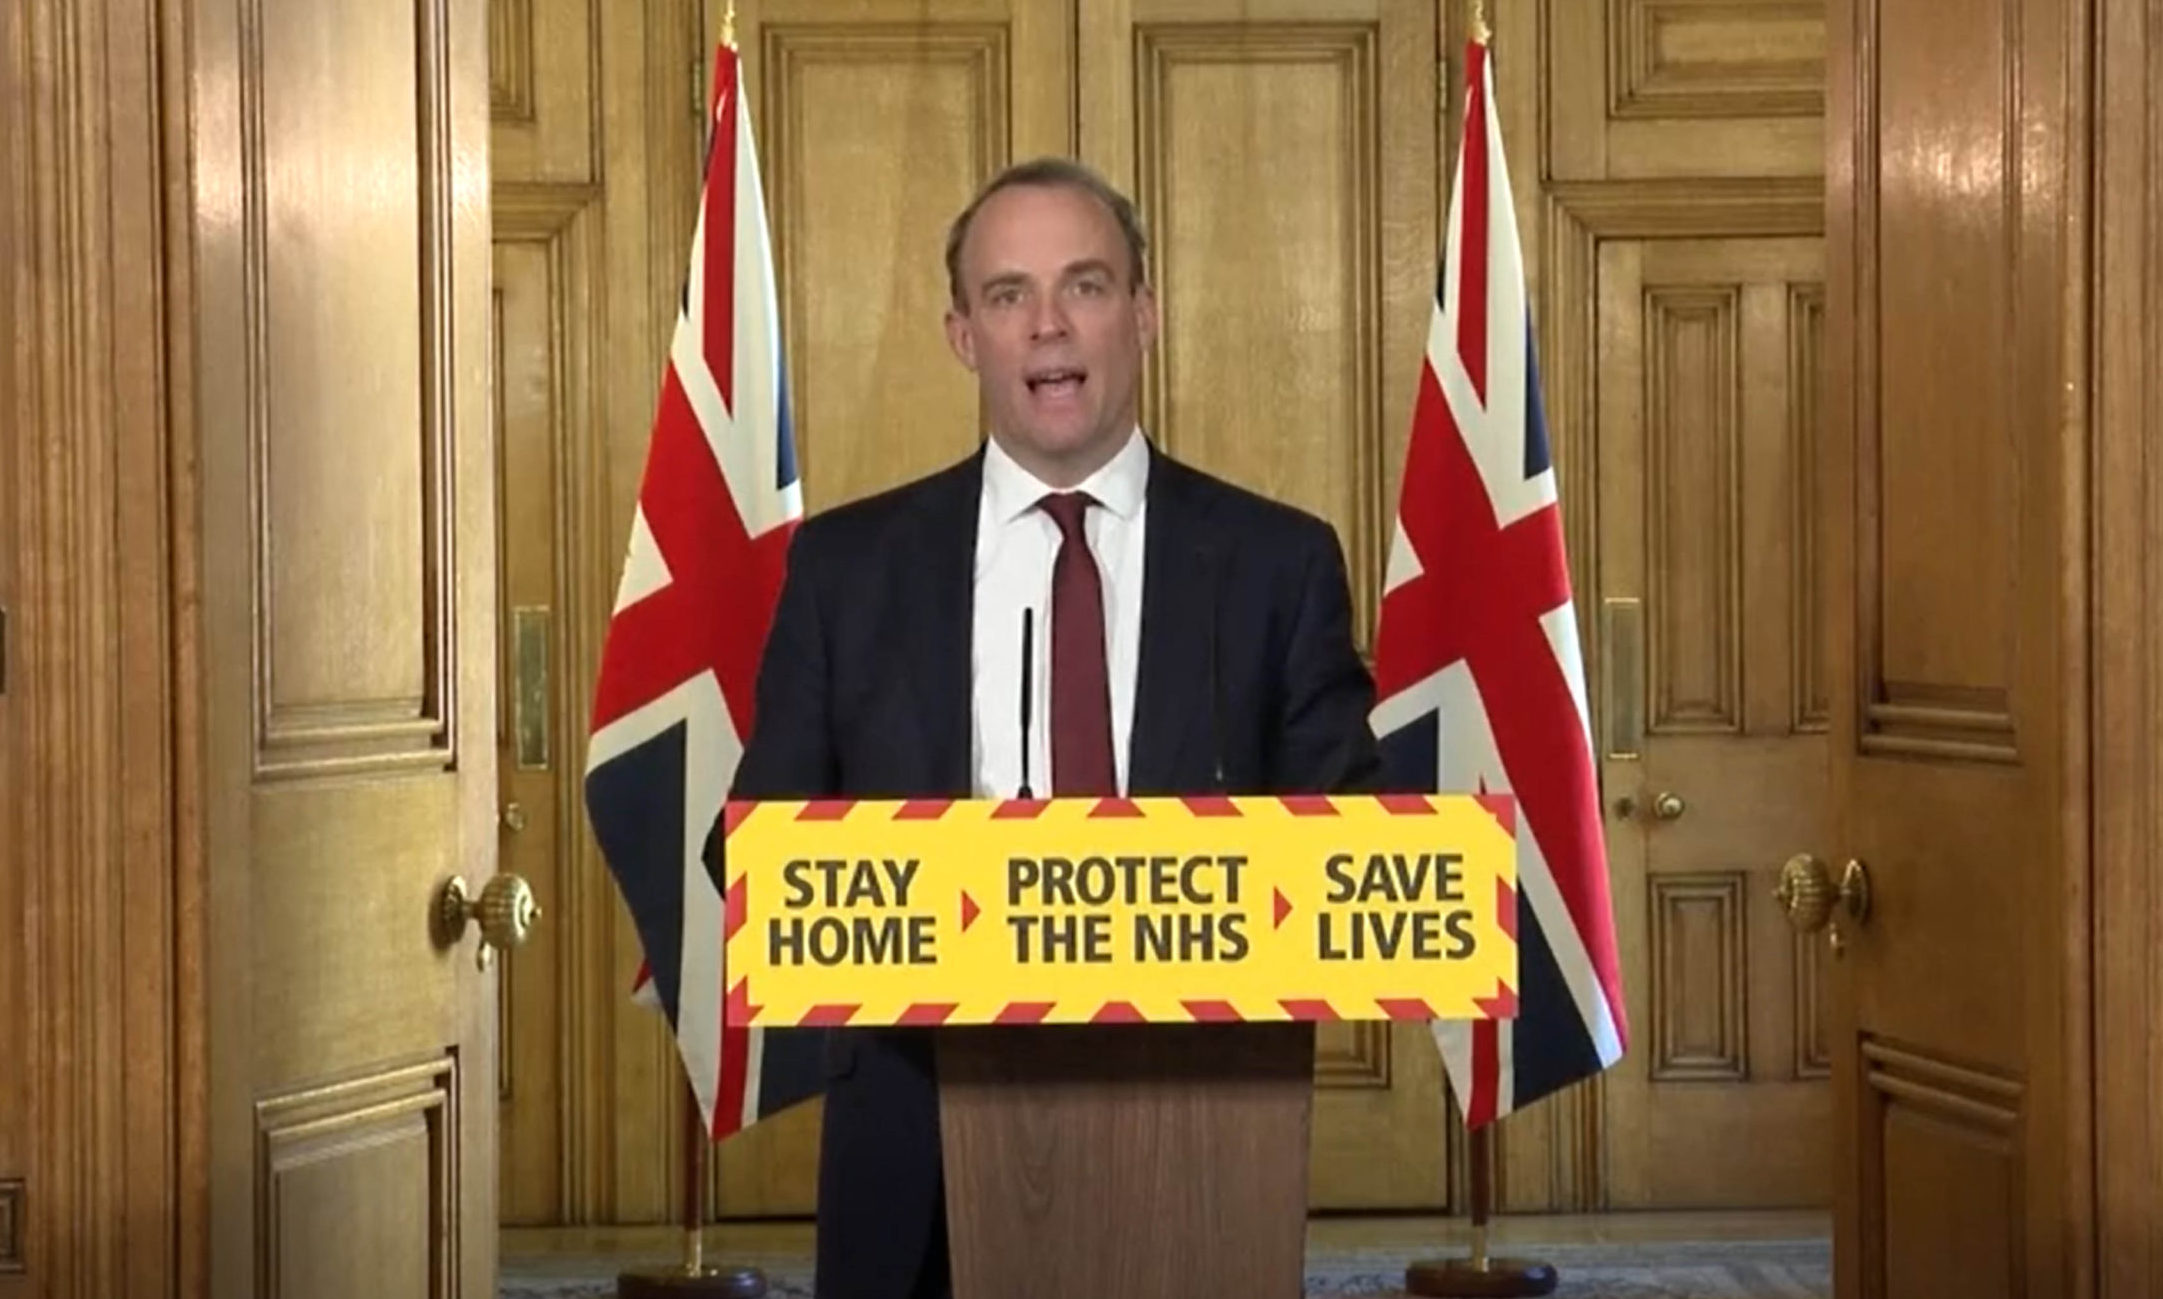 Foreign Secretary Dominic Raab during the briefing.